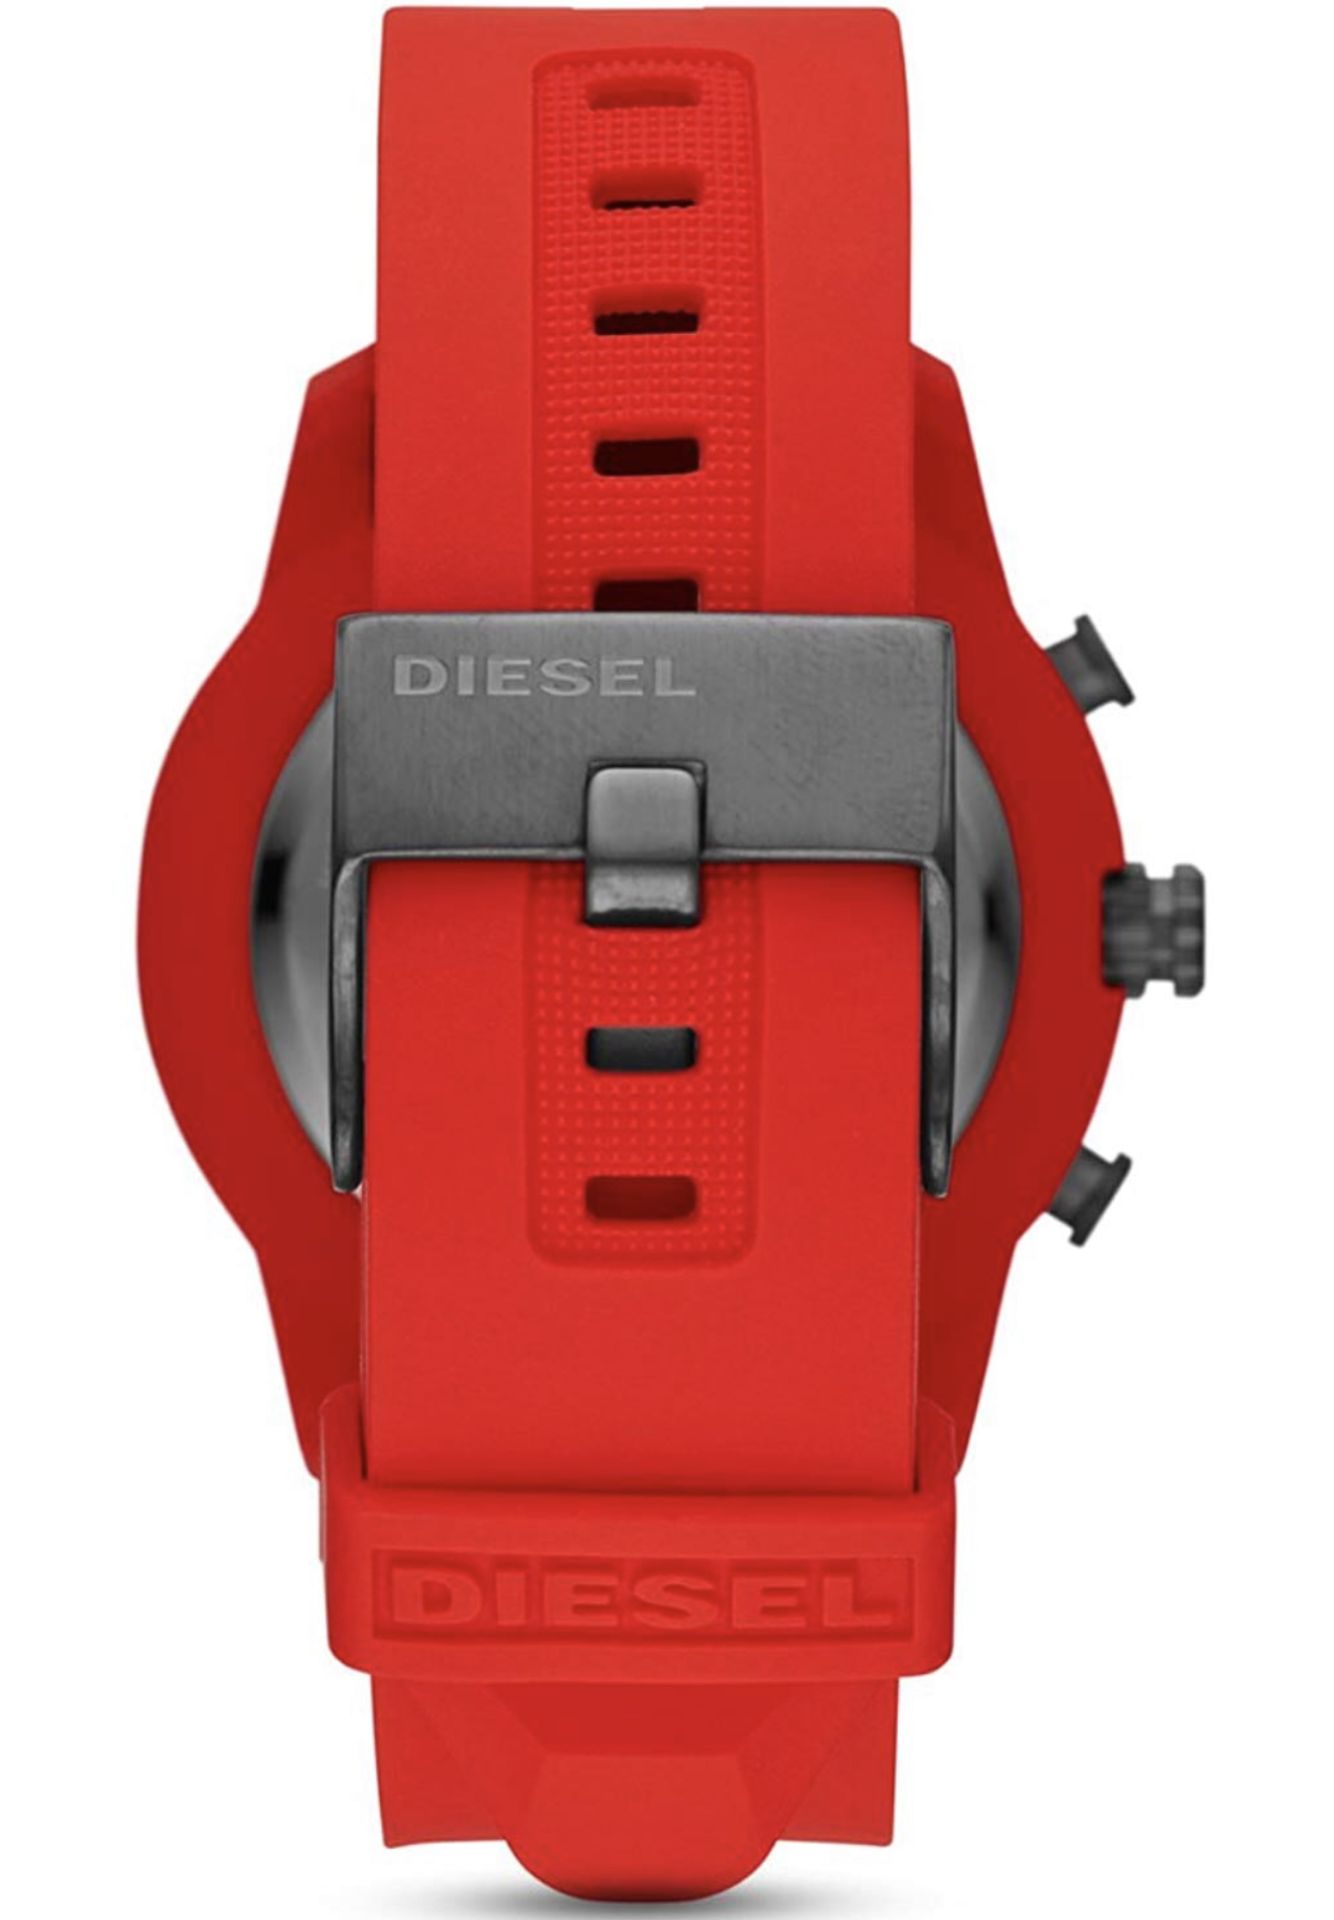 Diesel Men's Armbar Silicone Hybrid Smartwatch - Activity Tracker Compatible with Android and iOS - Image 4 of 4